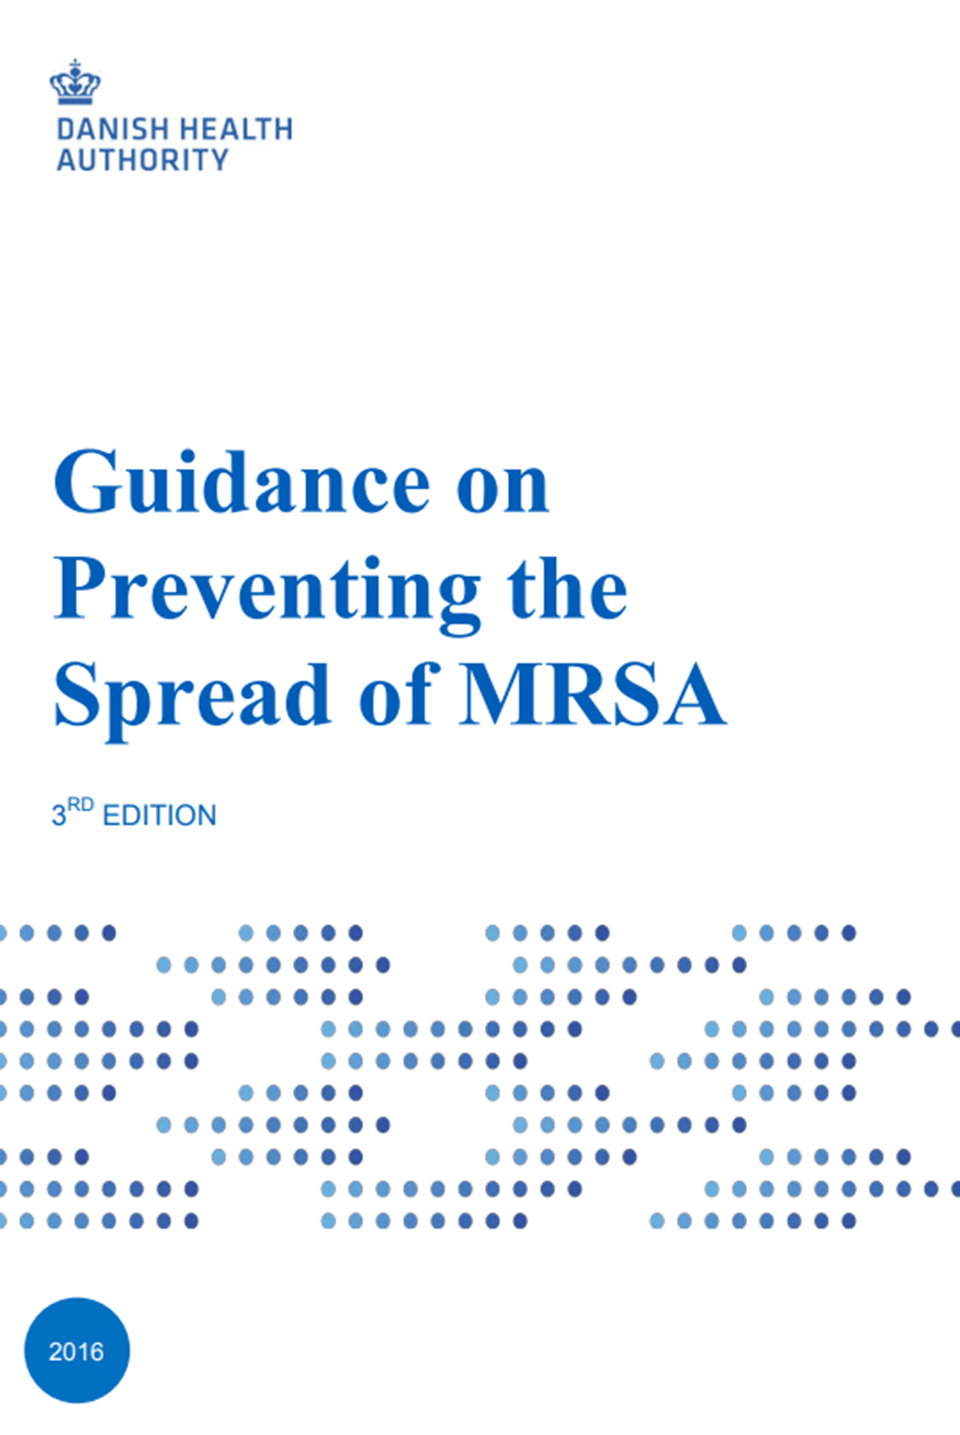 Guidance on Preventing the Spread of MRSA